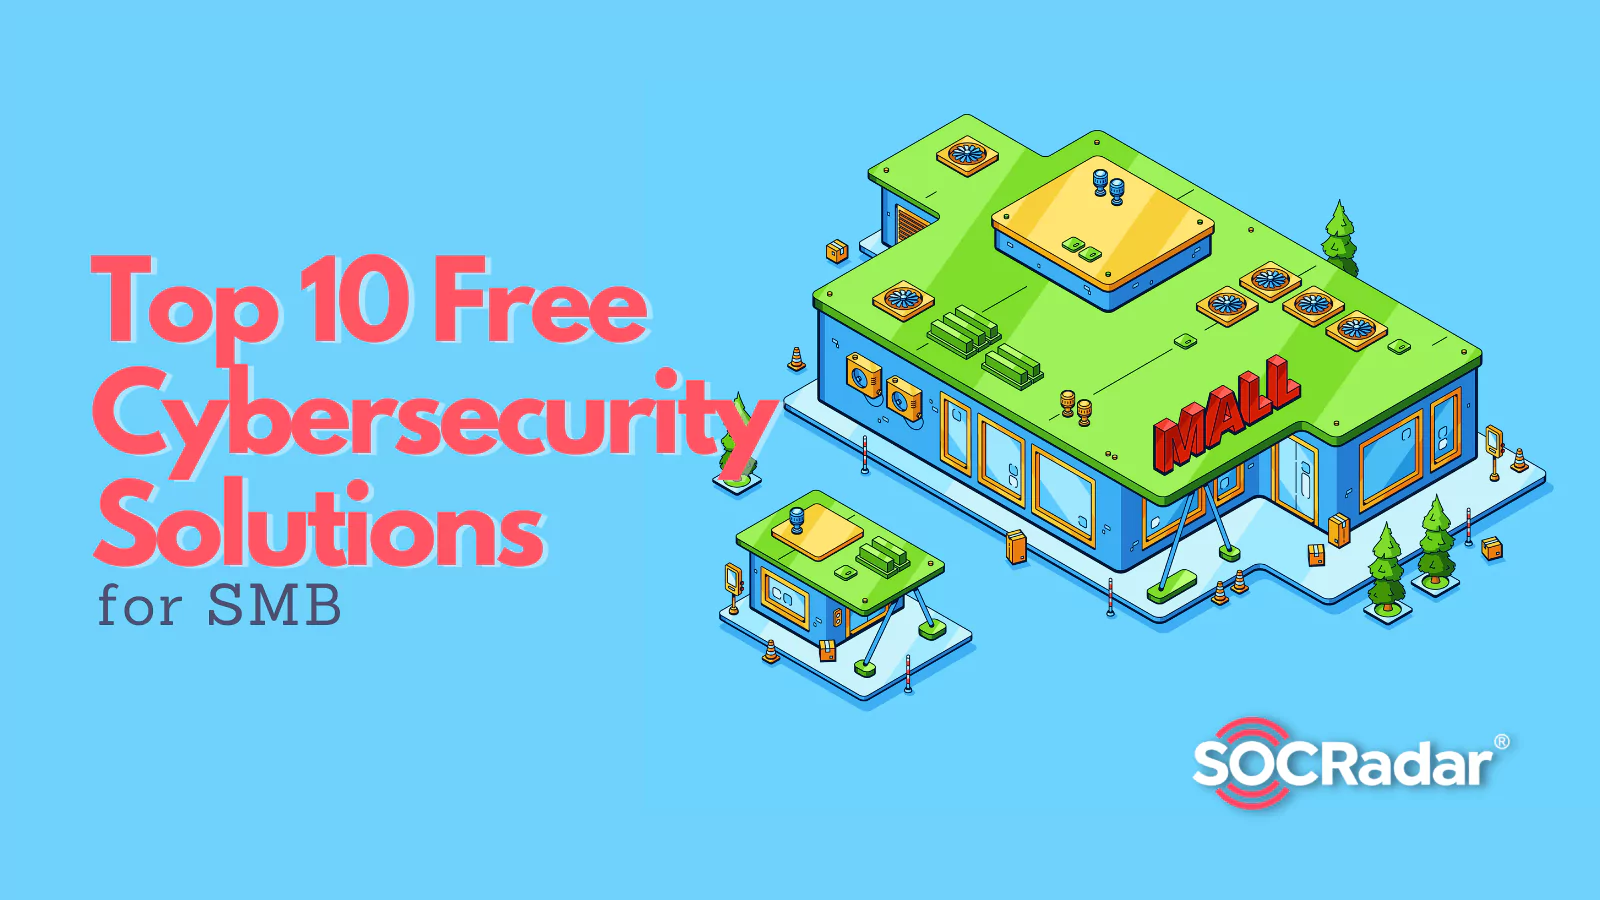 SOCRadar® Cyber Intelligence Inc. | Top 10 Free Cybersecurity Solutions for SMB